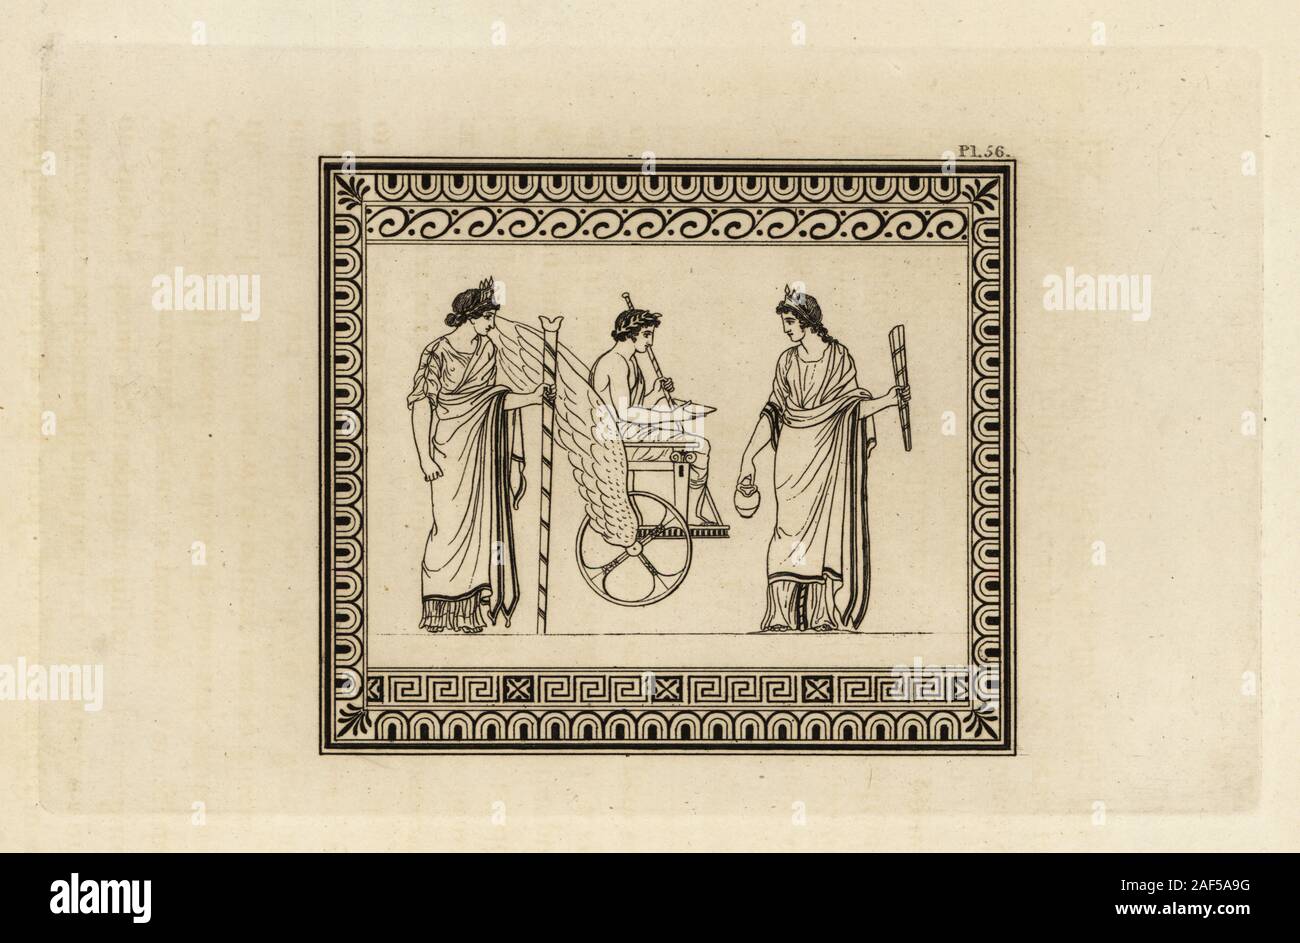 Greek god Apollo seated in a winged chariot. He holds a patera to receive a libation offering from a queen at right, while a priestess pronounces the oracle. Copperplate engraving by Thomas Kirk (1765-1797)  from Sir William Hamilton’s Outlines from the Figures and Compositions upon the Greek, Roman and Etruscan Vases of the Late Sir Hamilton, T. M’Lean, London, 1834. Stock Photo